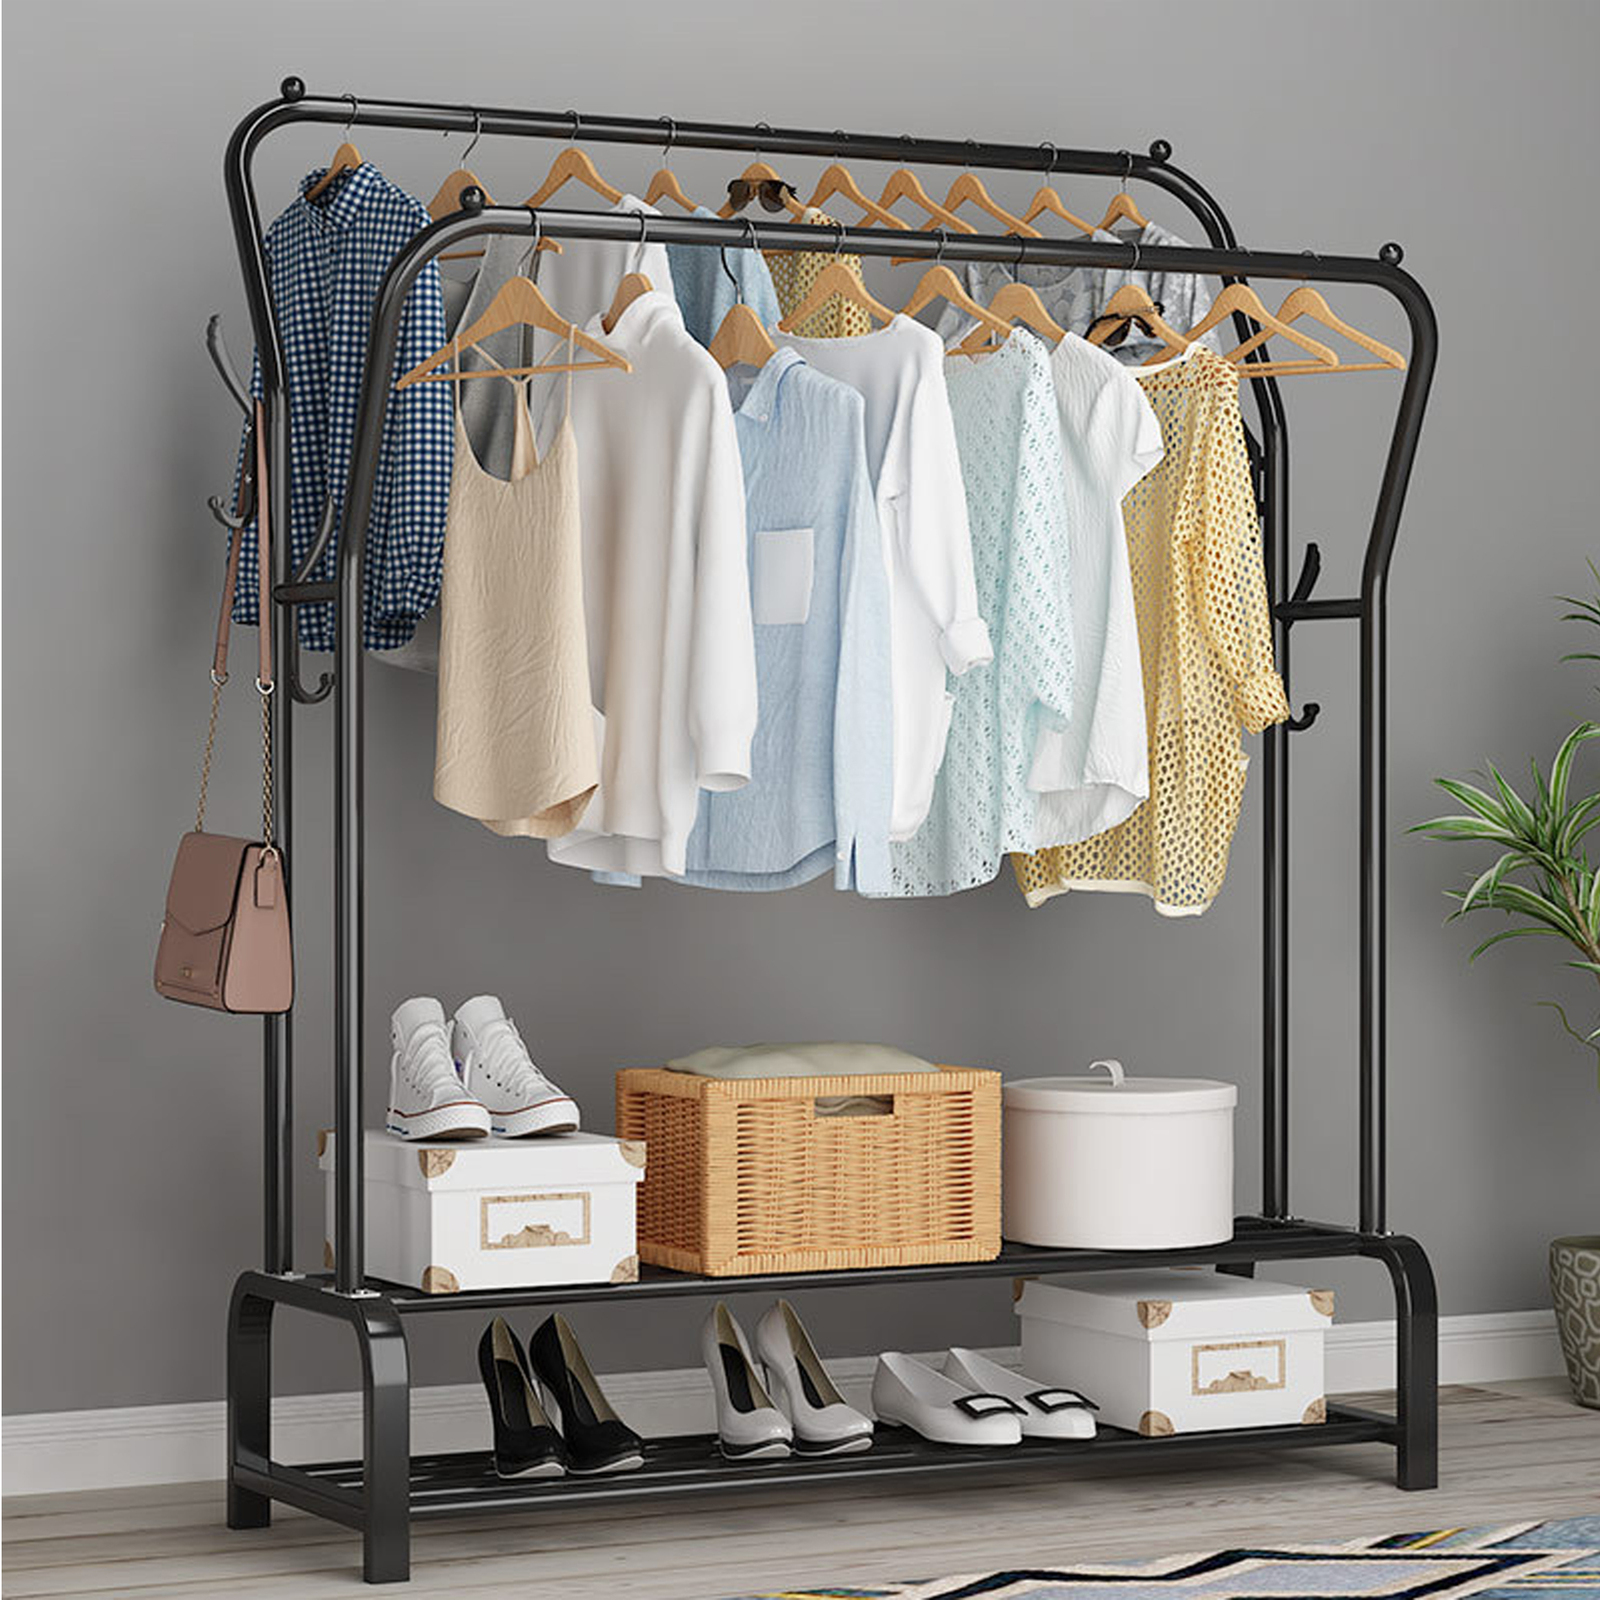 Large Double 2-Tier Coat Hanging Stand Wardrobe Clothes Hanger Rack